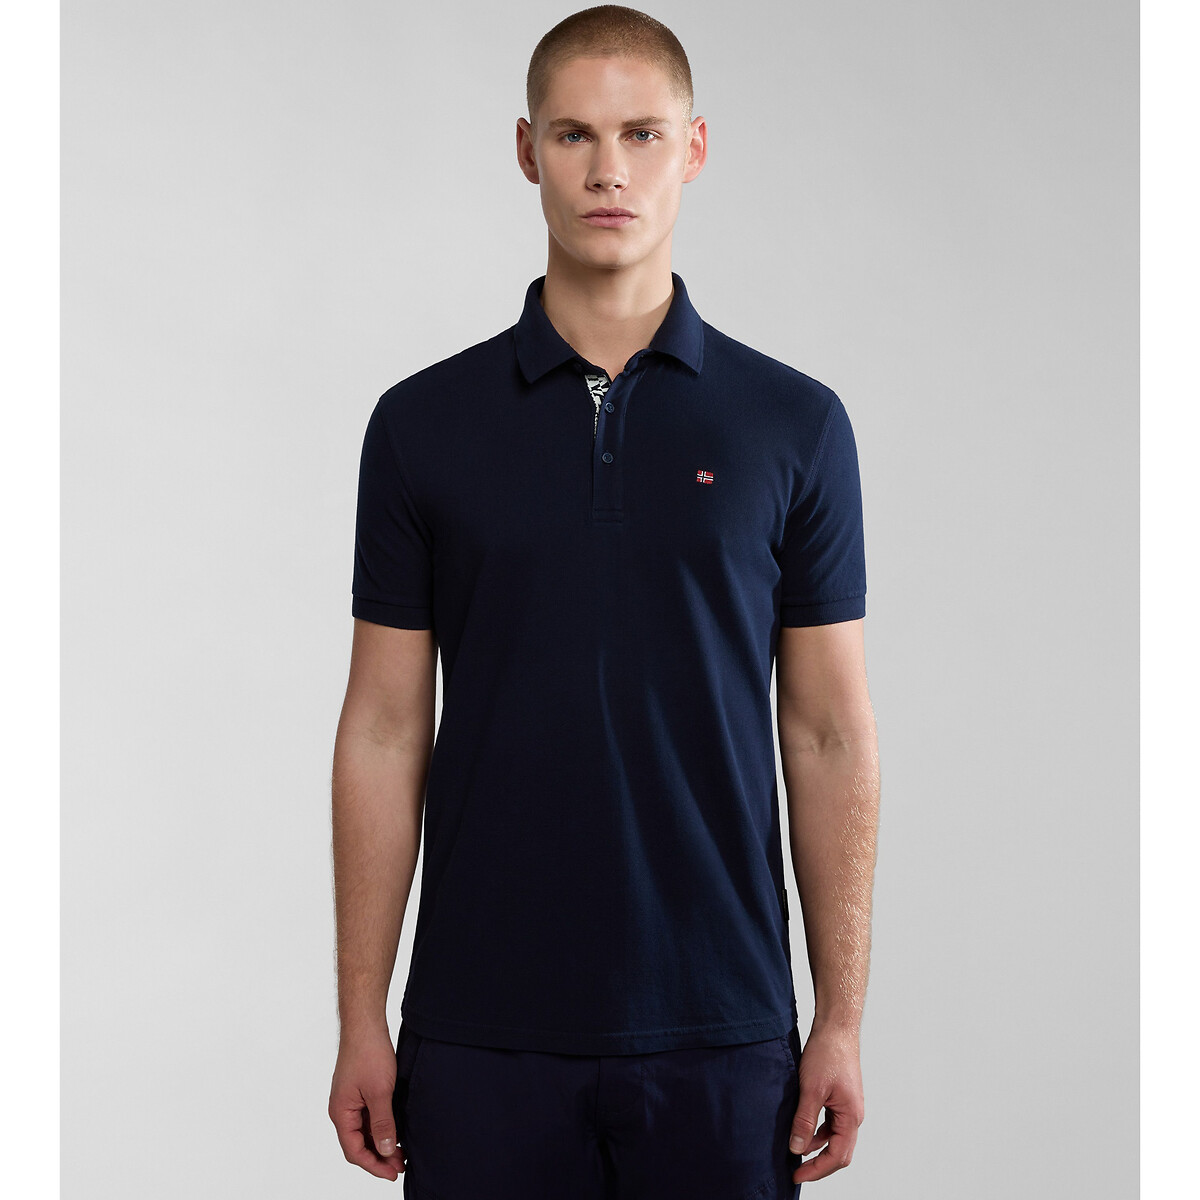 Image of Eolanos Cotton Polo Shirt with Short Sleeves